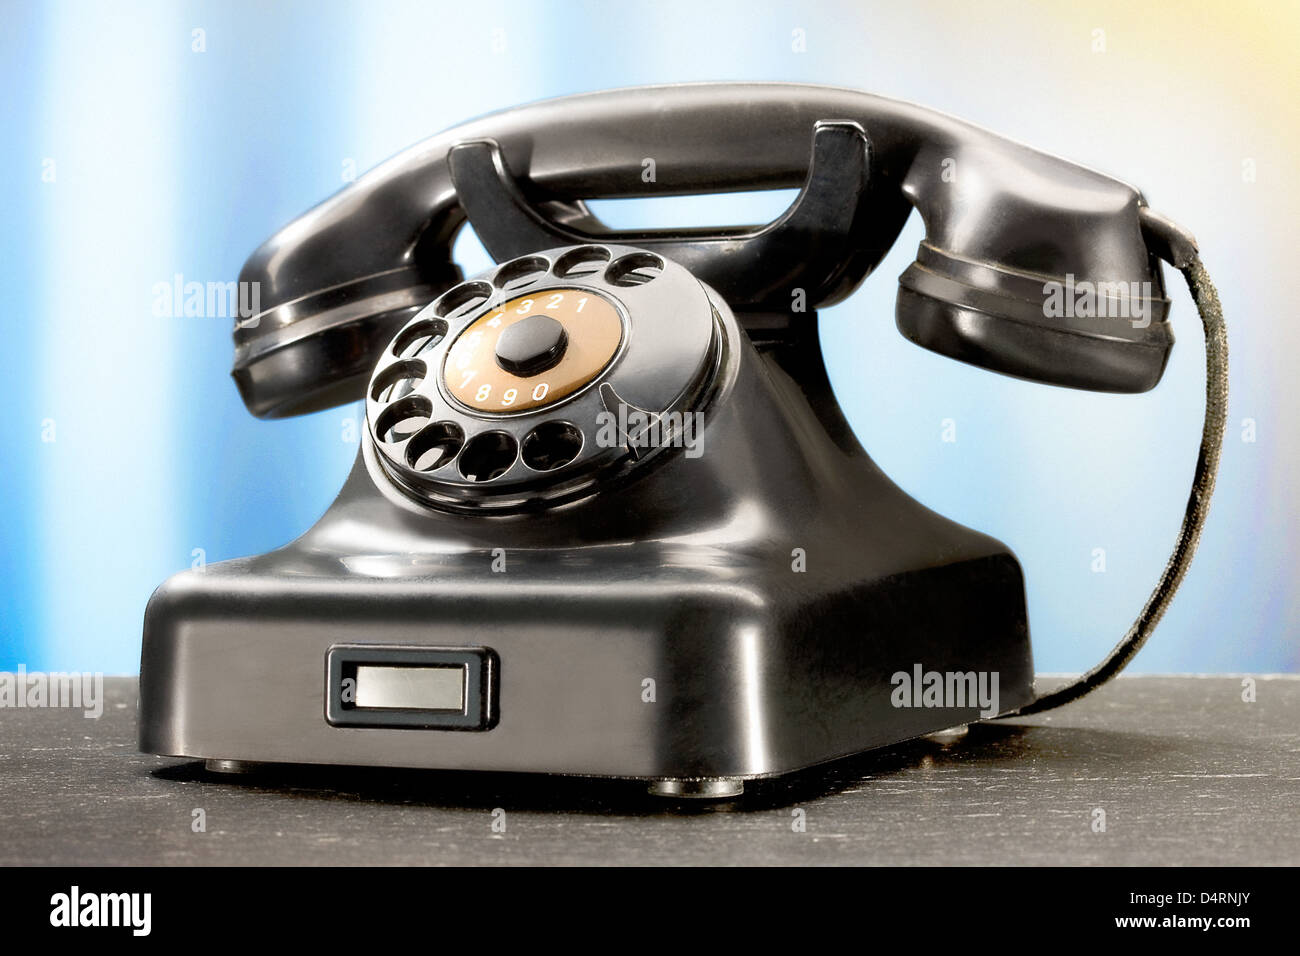 Still life antiquated black telephone  with dial plate Stock Photo